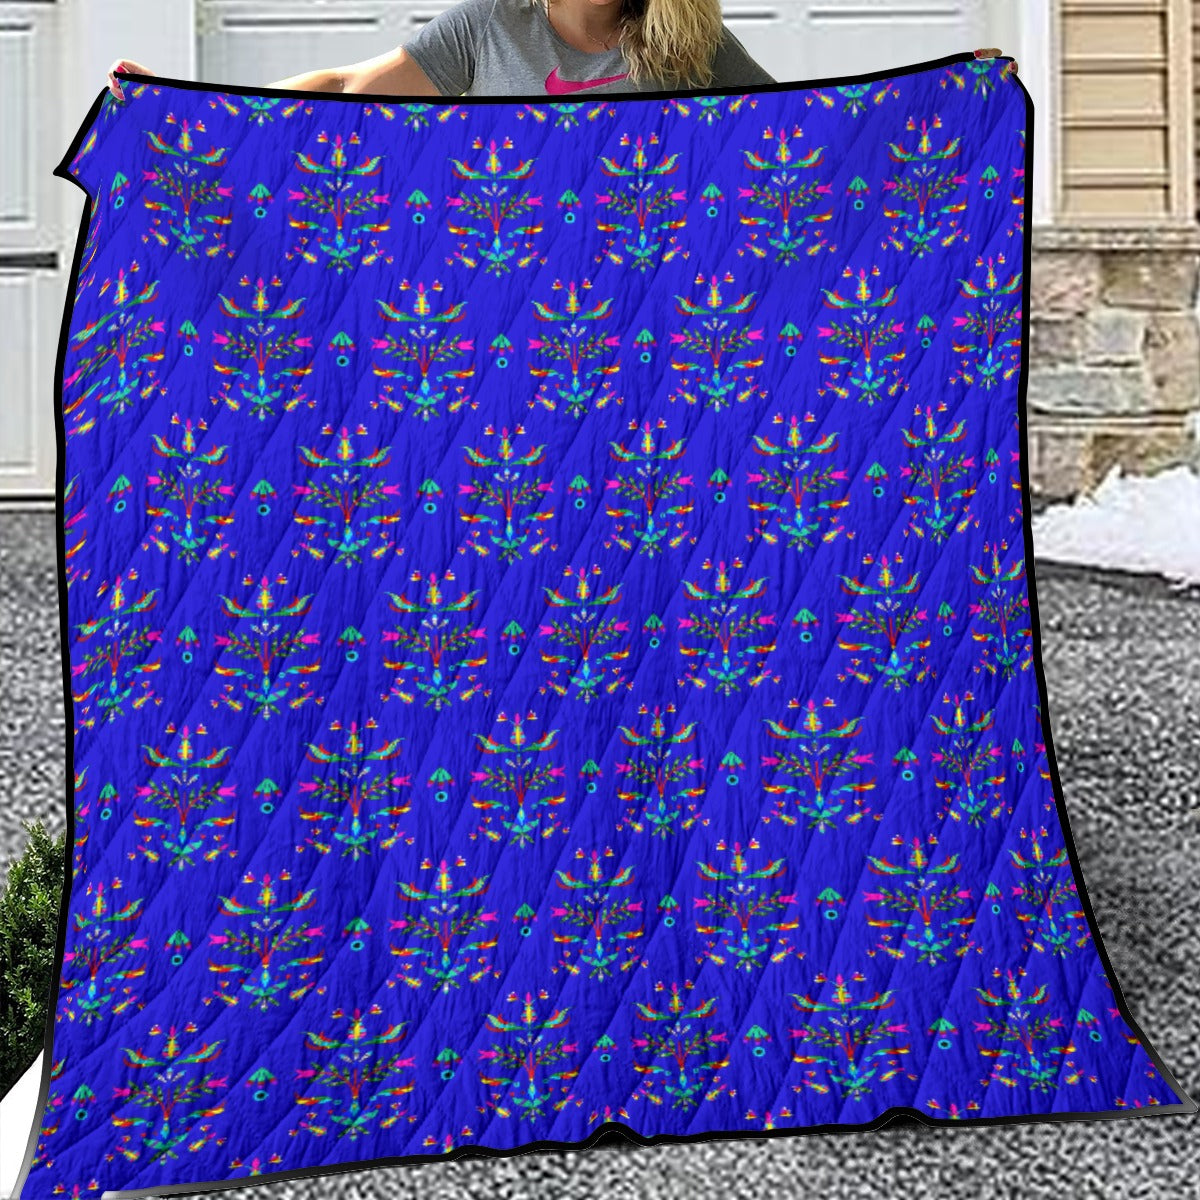 Dakota Damask Blue Lightweight & Breathable Quilt With Edge-wrapping Strips